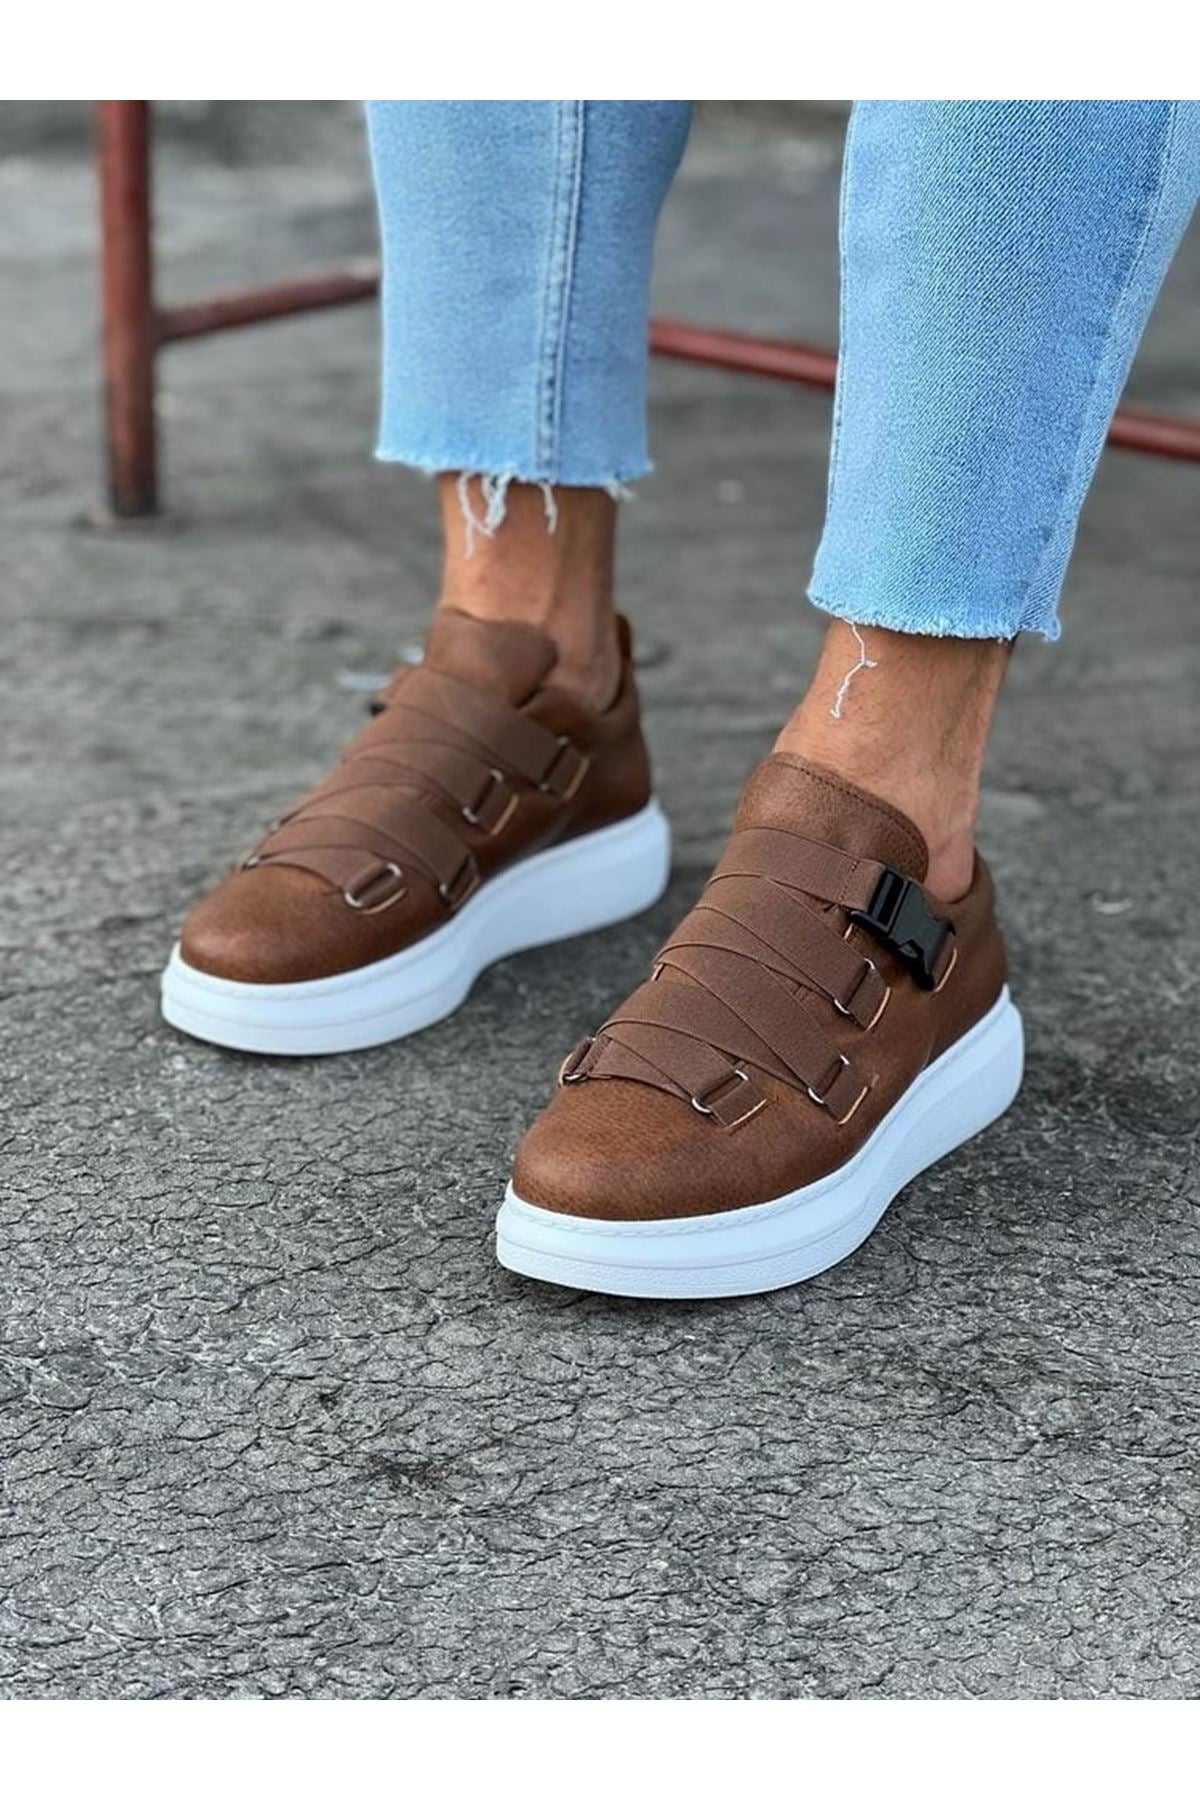 WG033 Tobacco Men's High-Sole Shoes sneakers - STREETMODE ™